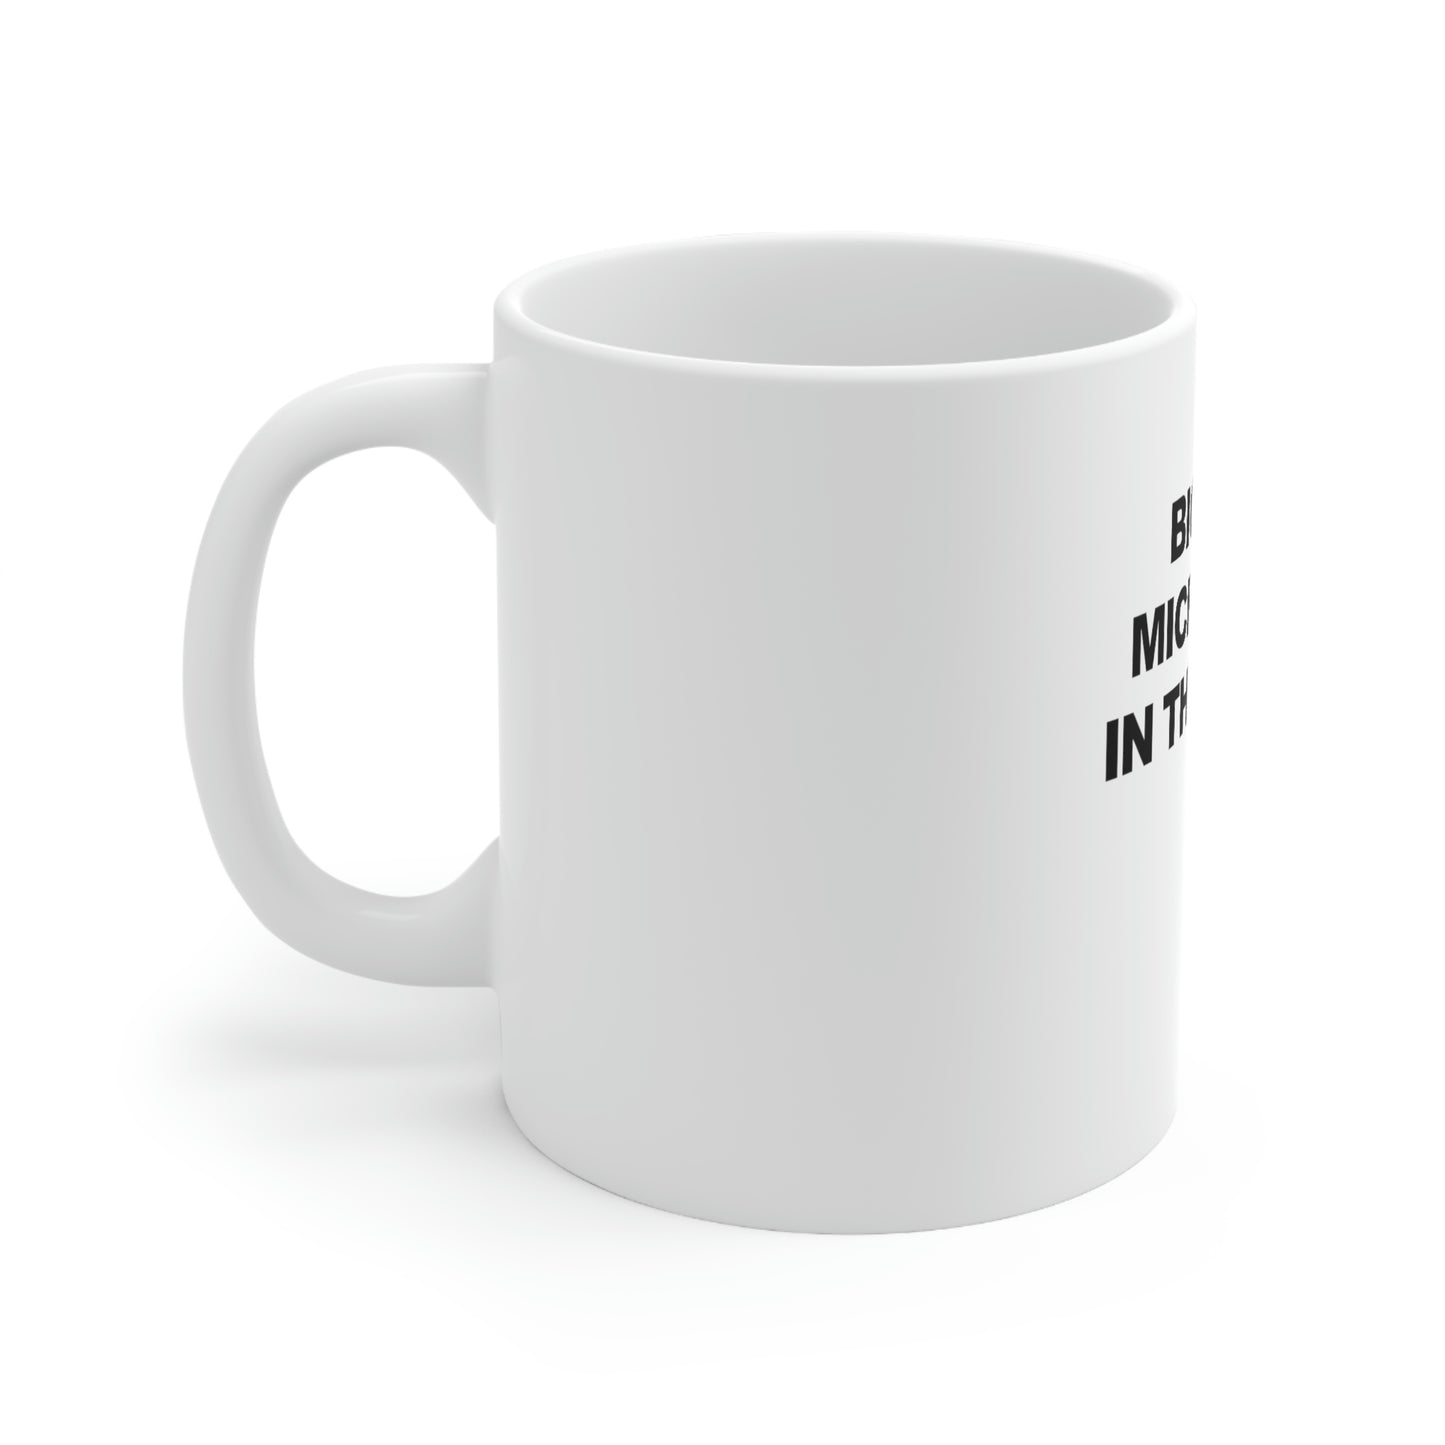 Biggest Micropenis In the World Mug